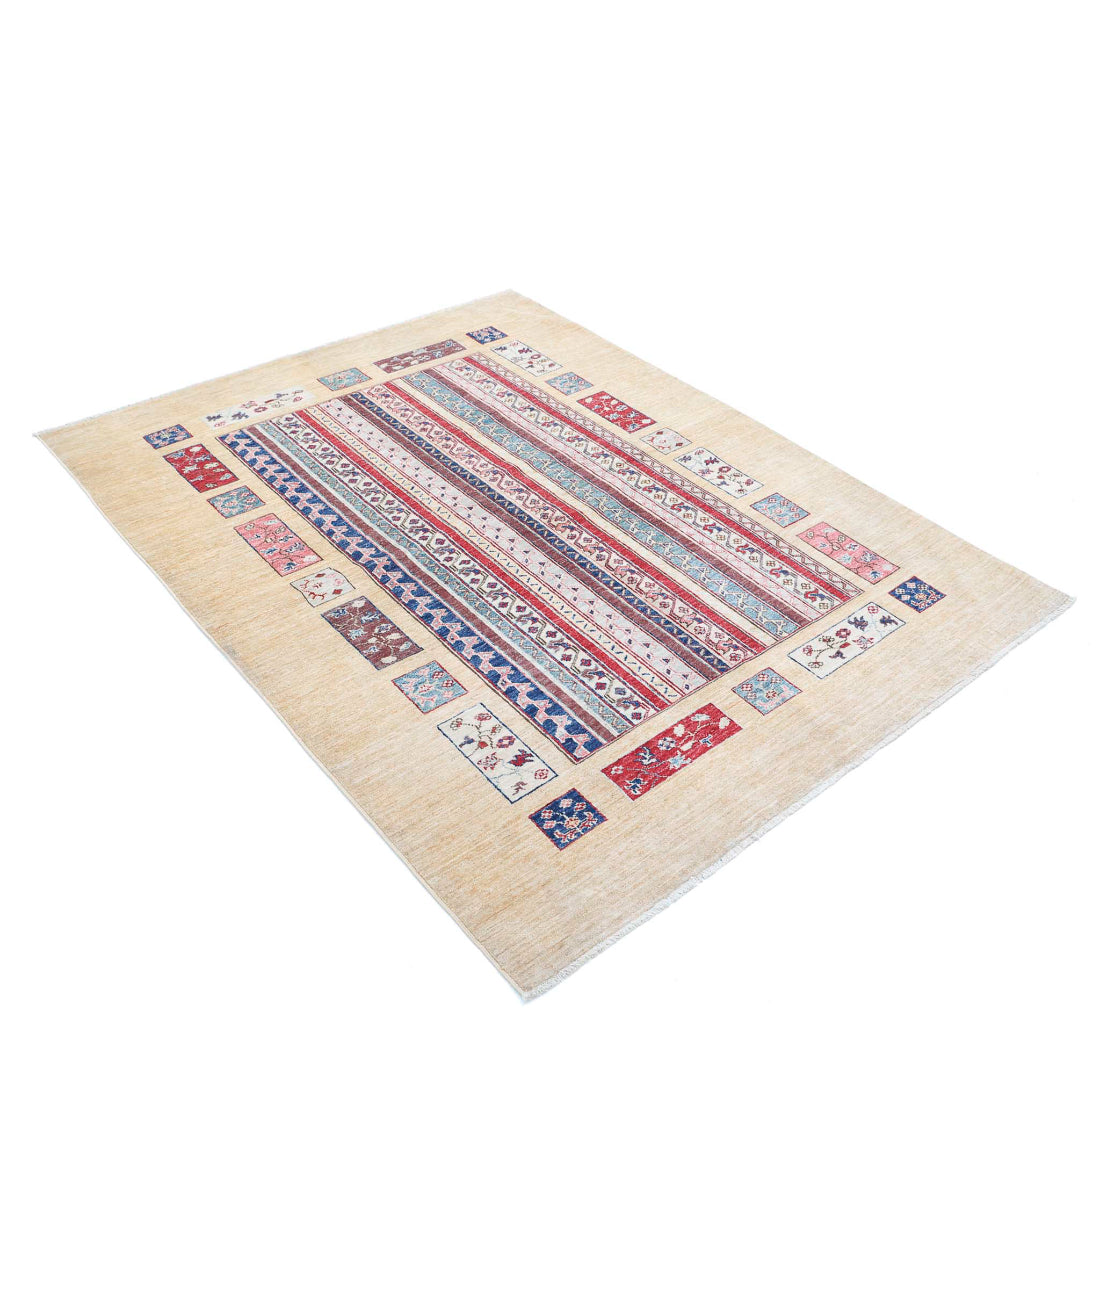 Shaal 4'11'' X 6'4'' Hand-Knotted Wool Rug 4'11'' x 6'4'' (148 X 190) / Multi / Beige